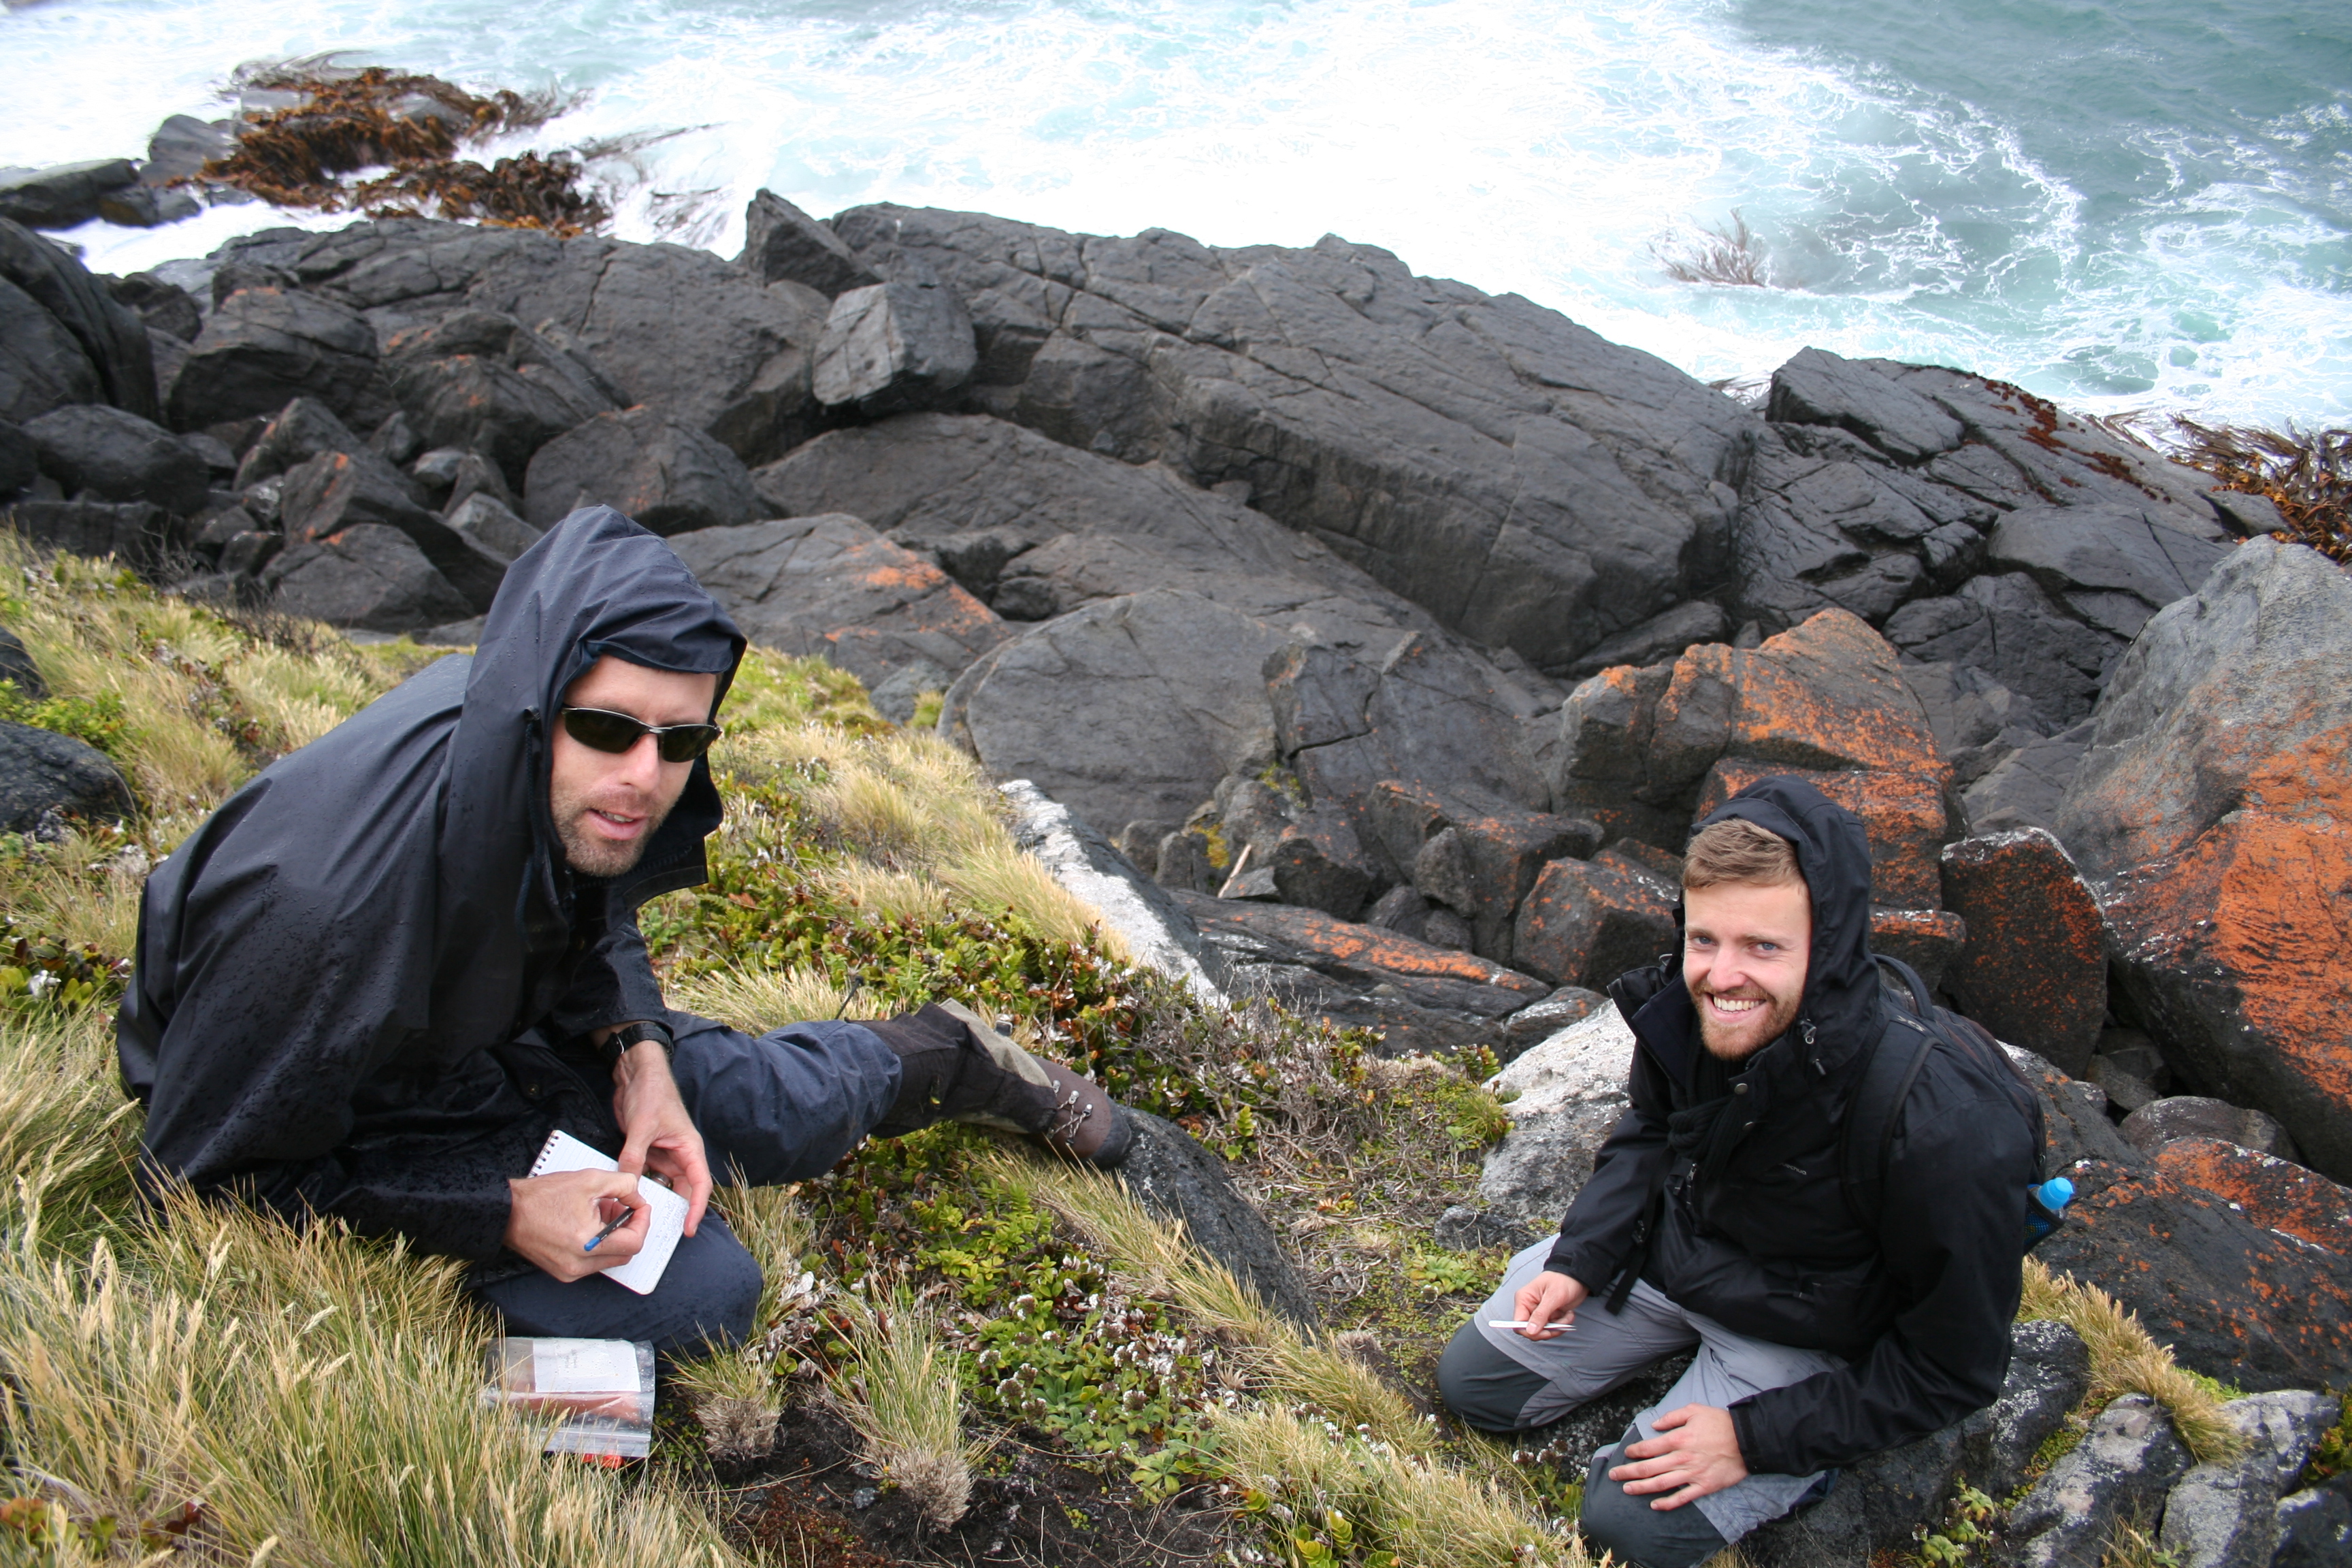 Ant and Mathew making research collections and notes of Myosotis rakiura near Bluff, December 2016. Photo by Heidi Meudt @ Te Papa.